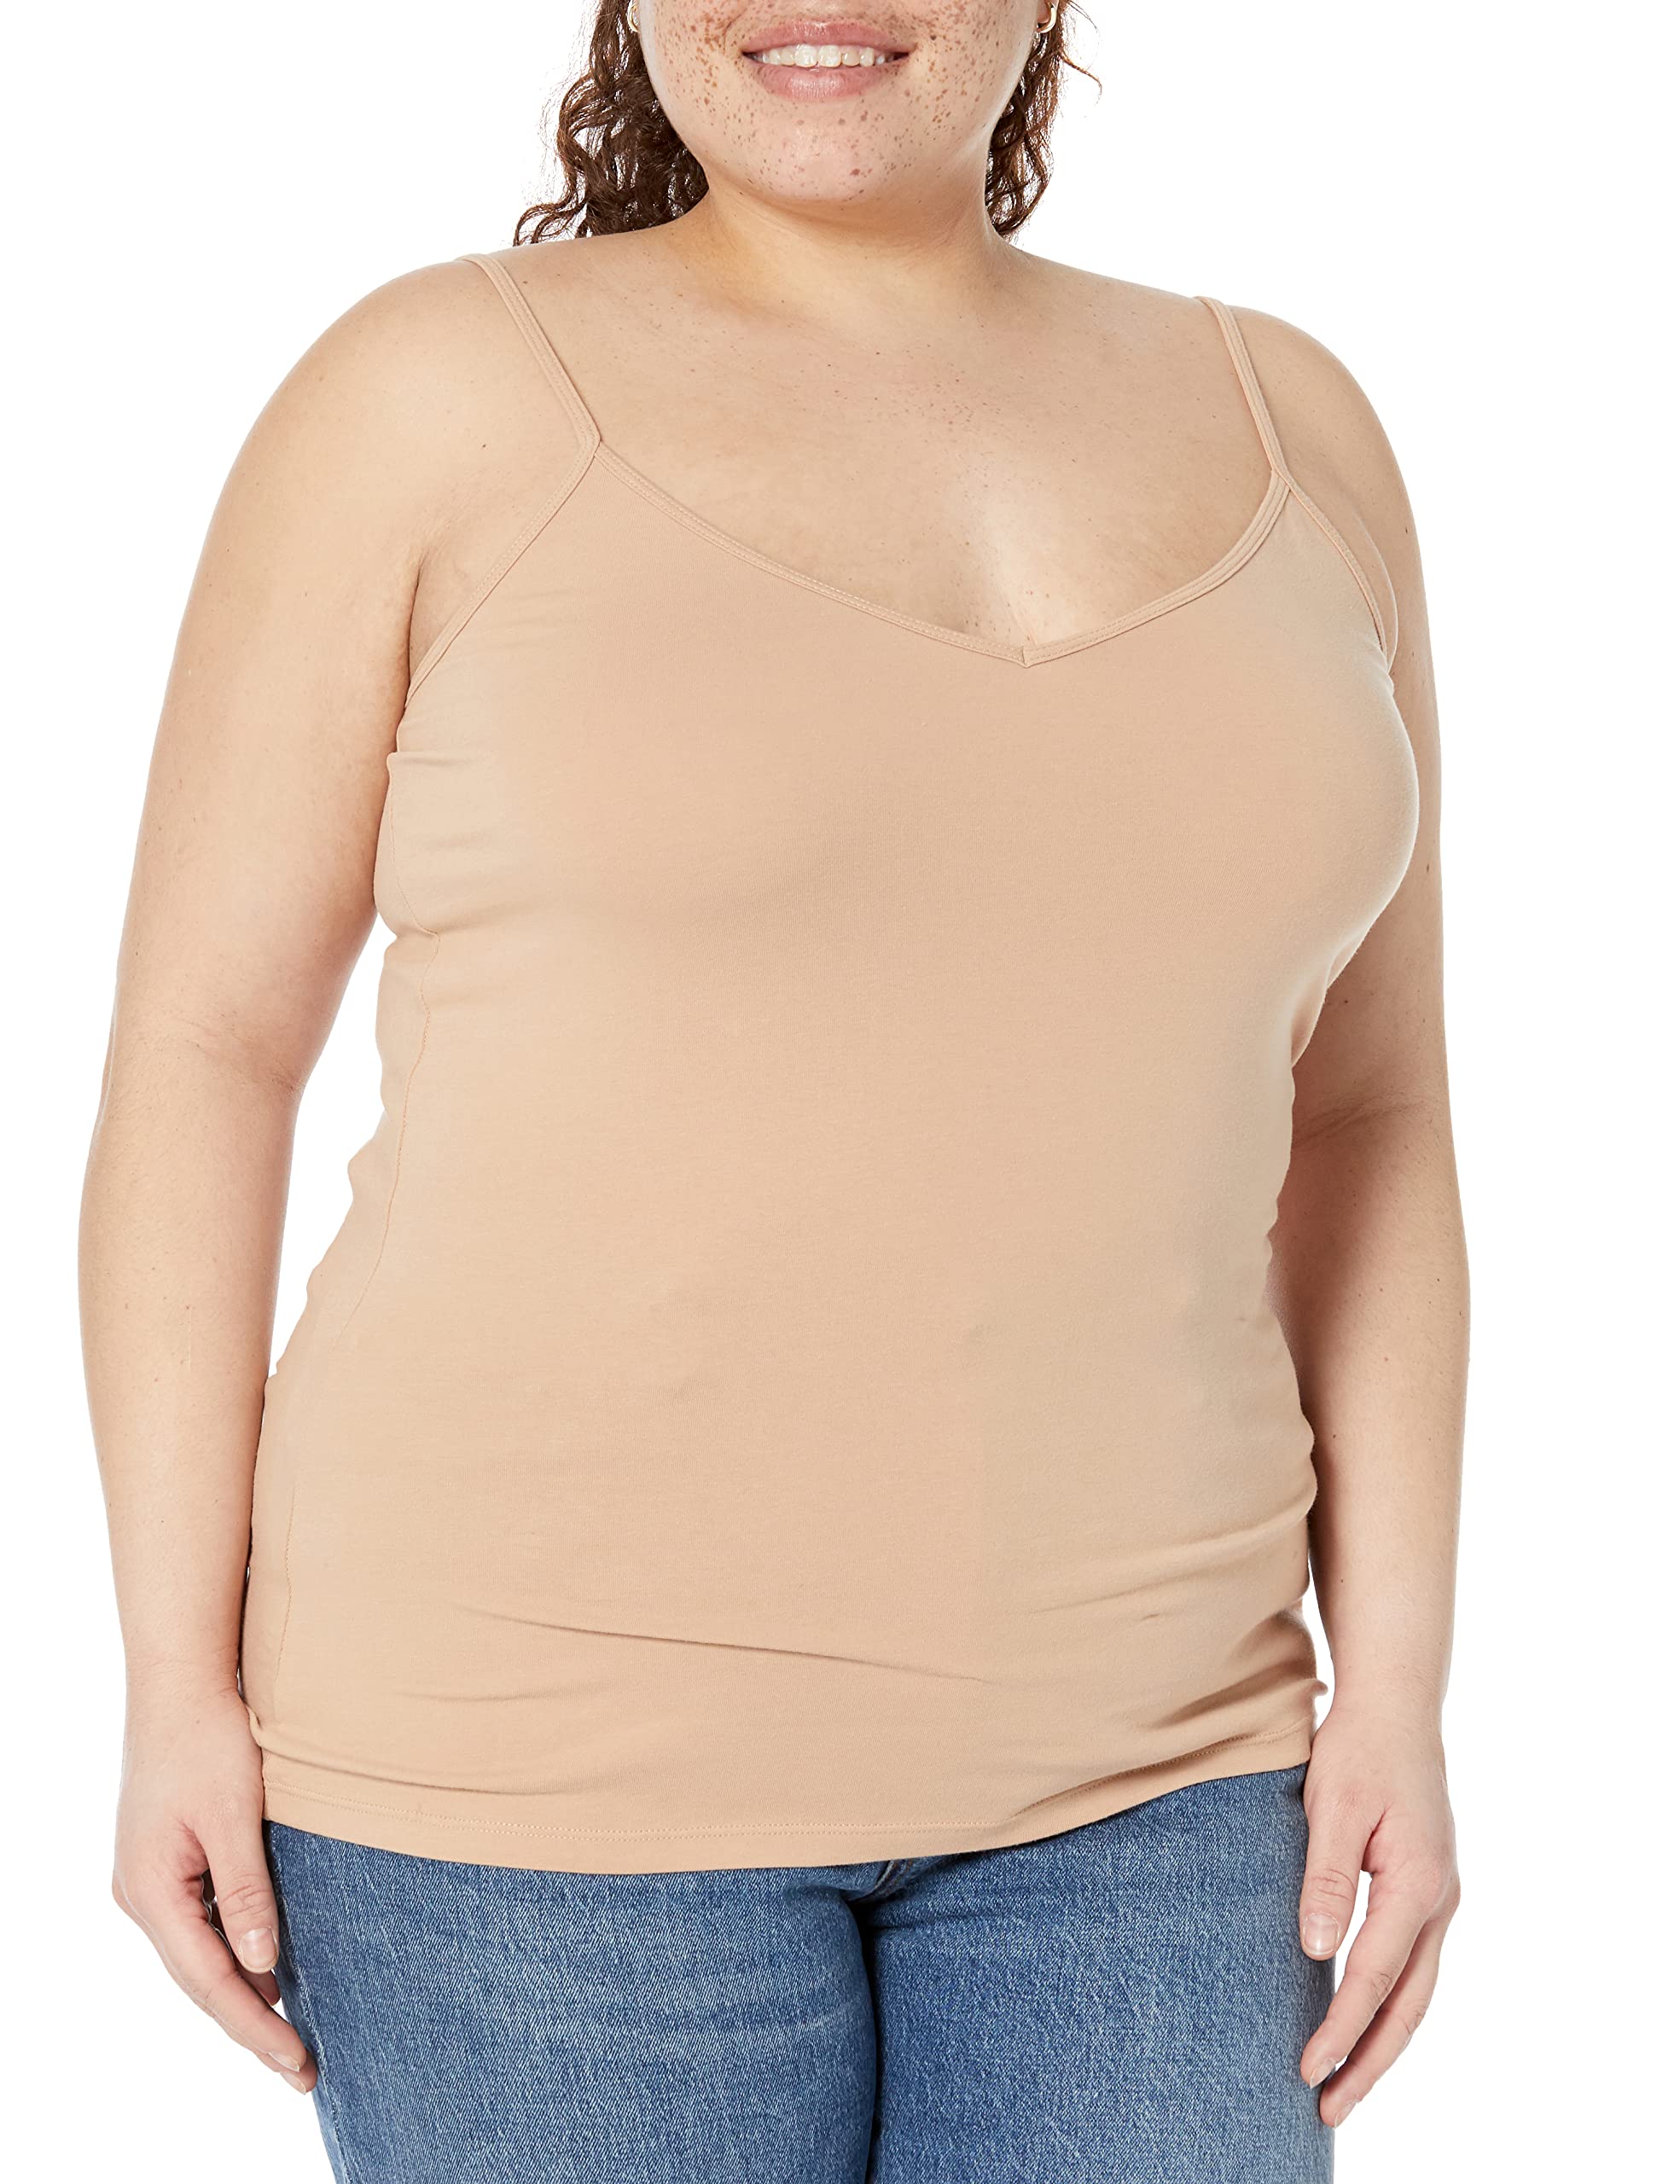 Amazon Essentials Women's Slim-Fit Knit V-Neck Layering Cami (Available in Plus Size), Pack of 4